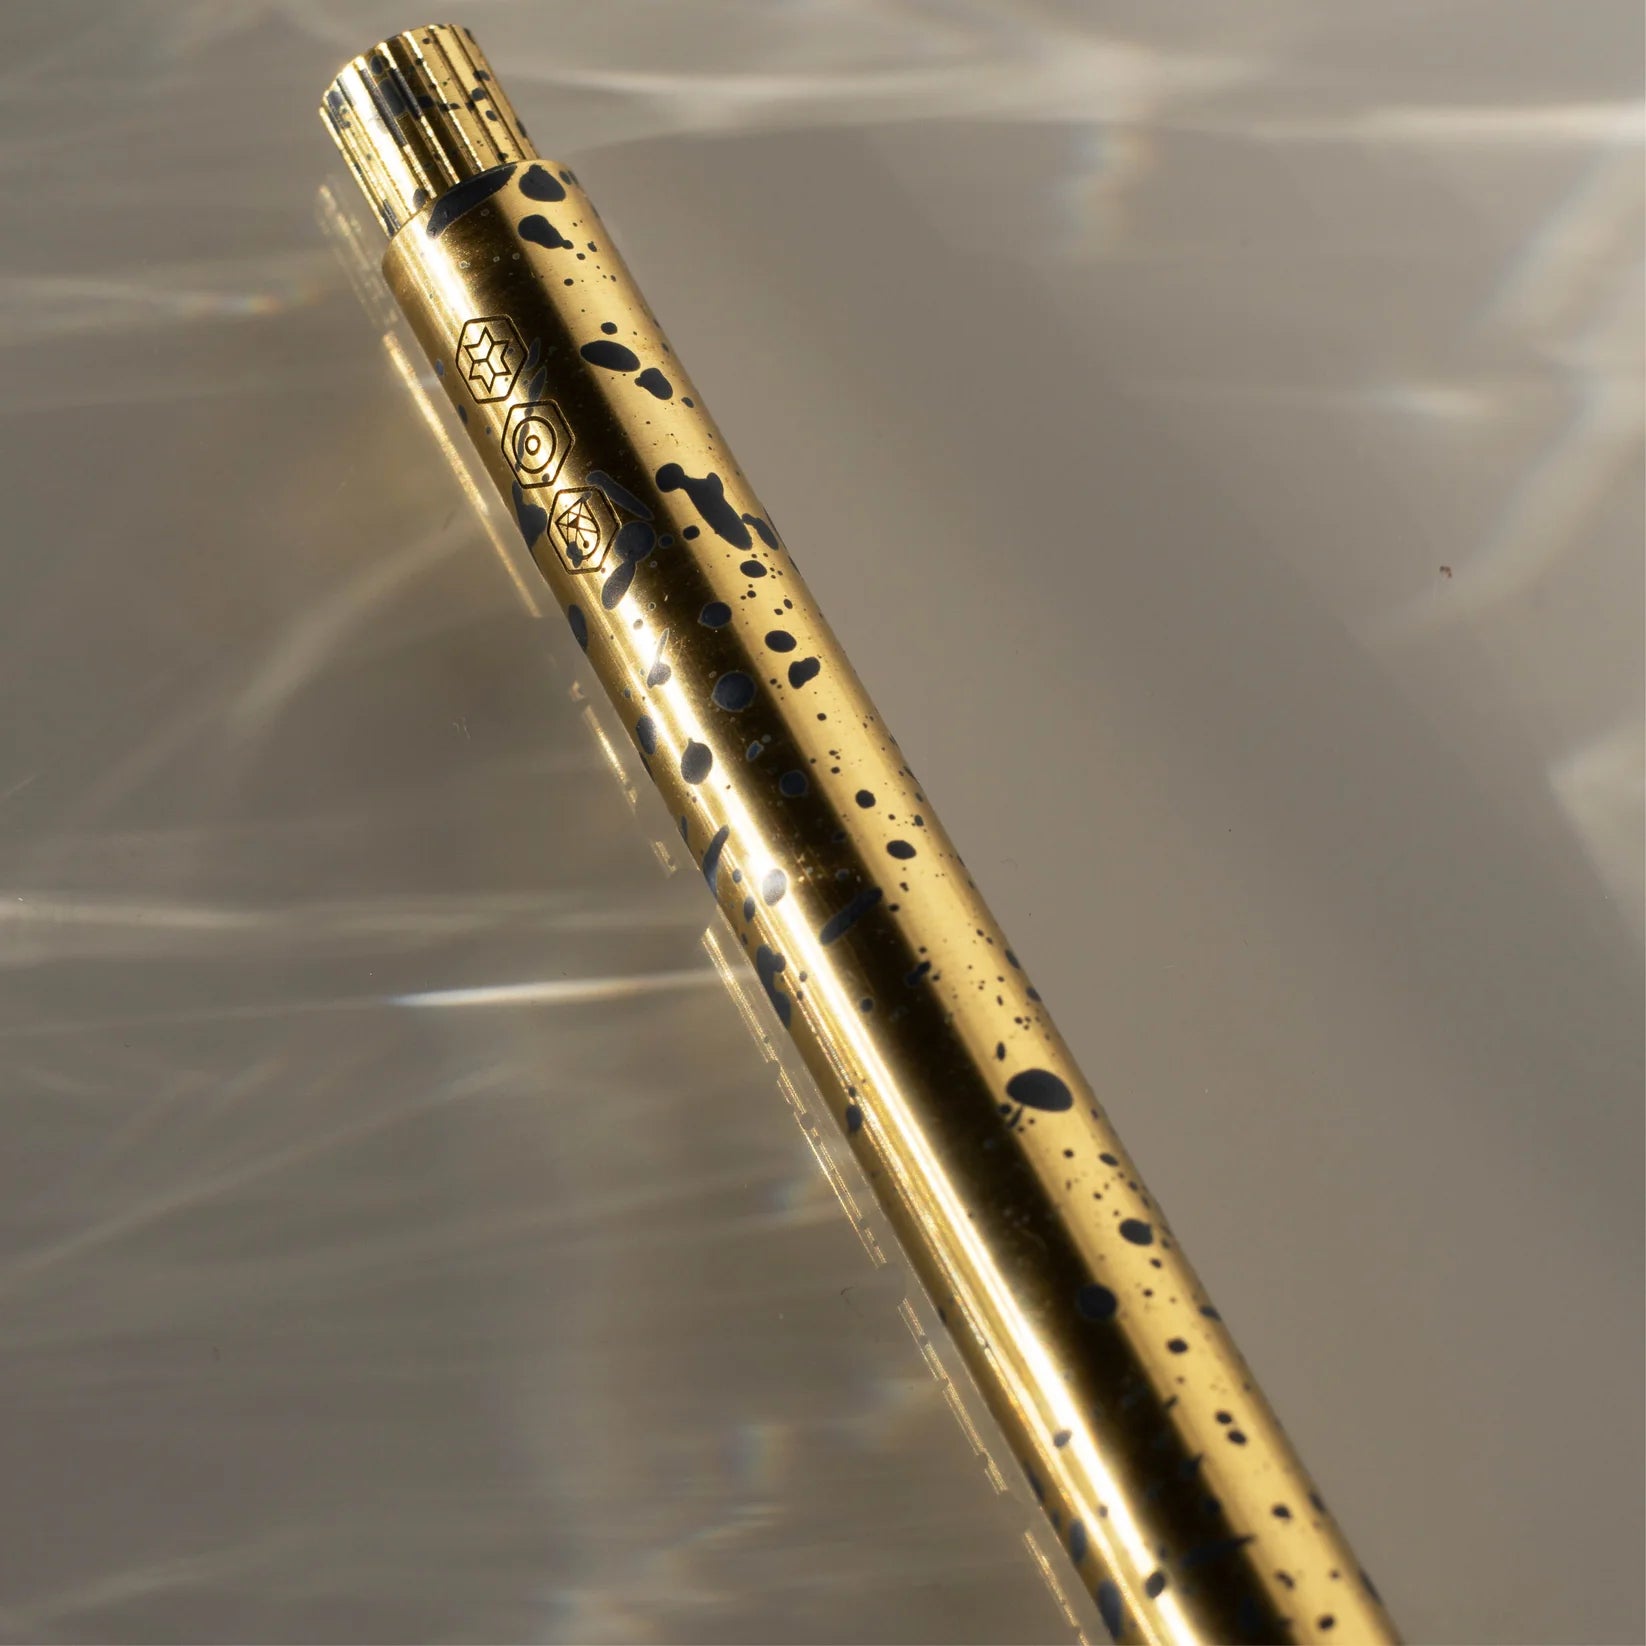 AJOTO for Laywine’s Navy Speckle Brass Rollerball Pen